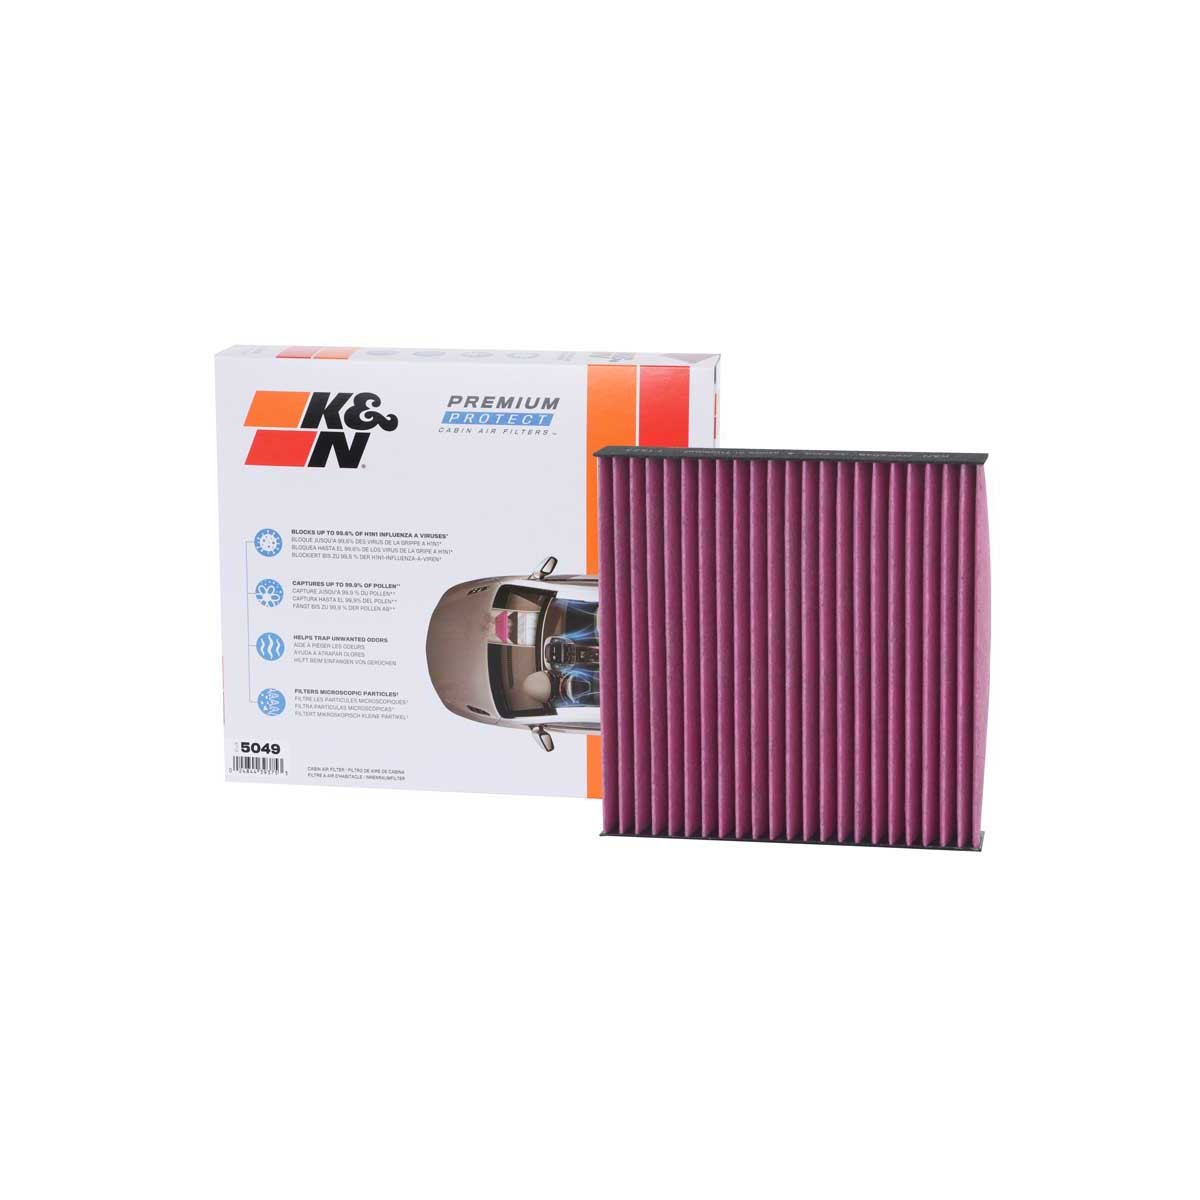 DVF5049 AC filter Disposable Cabin Filter K&N Filters DVF5049 review and test